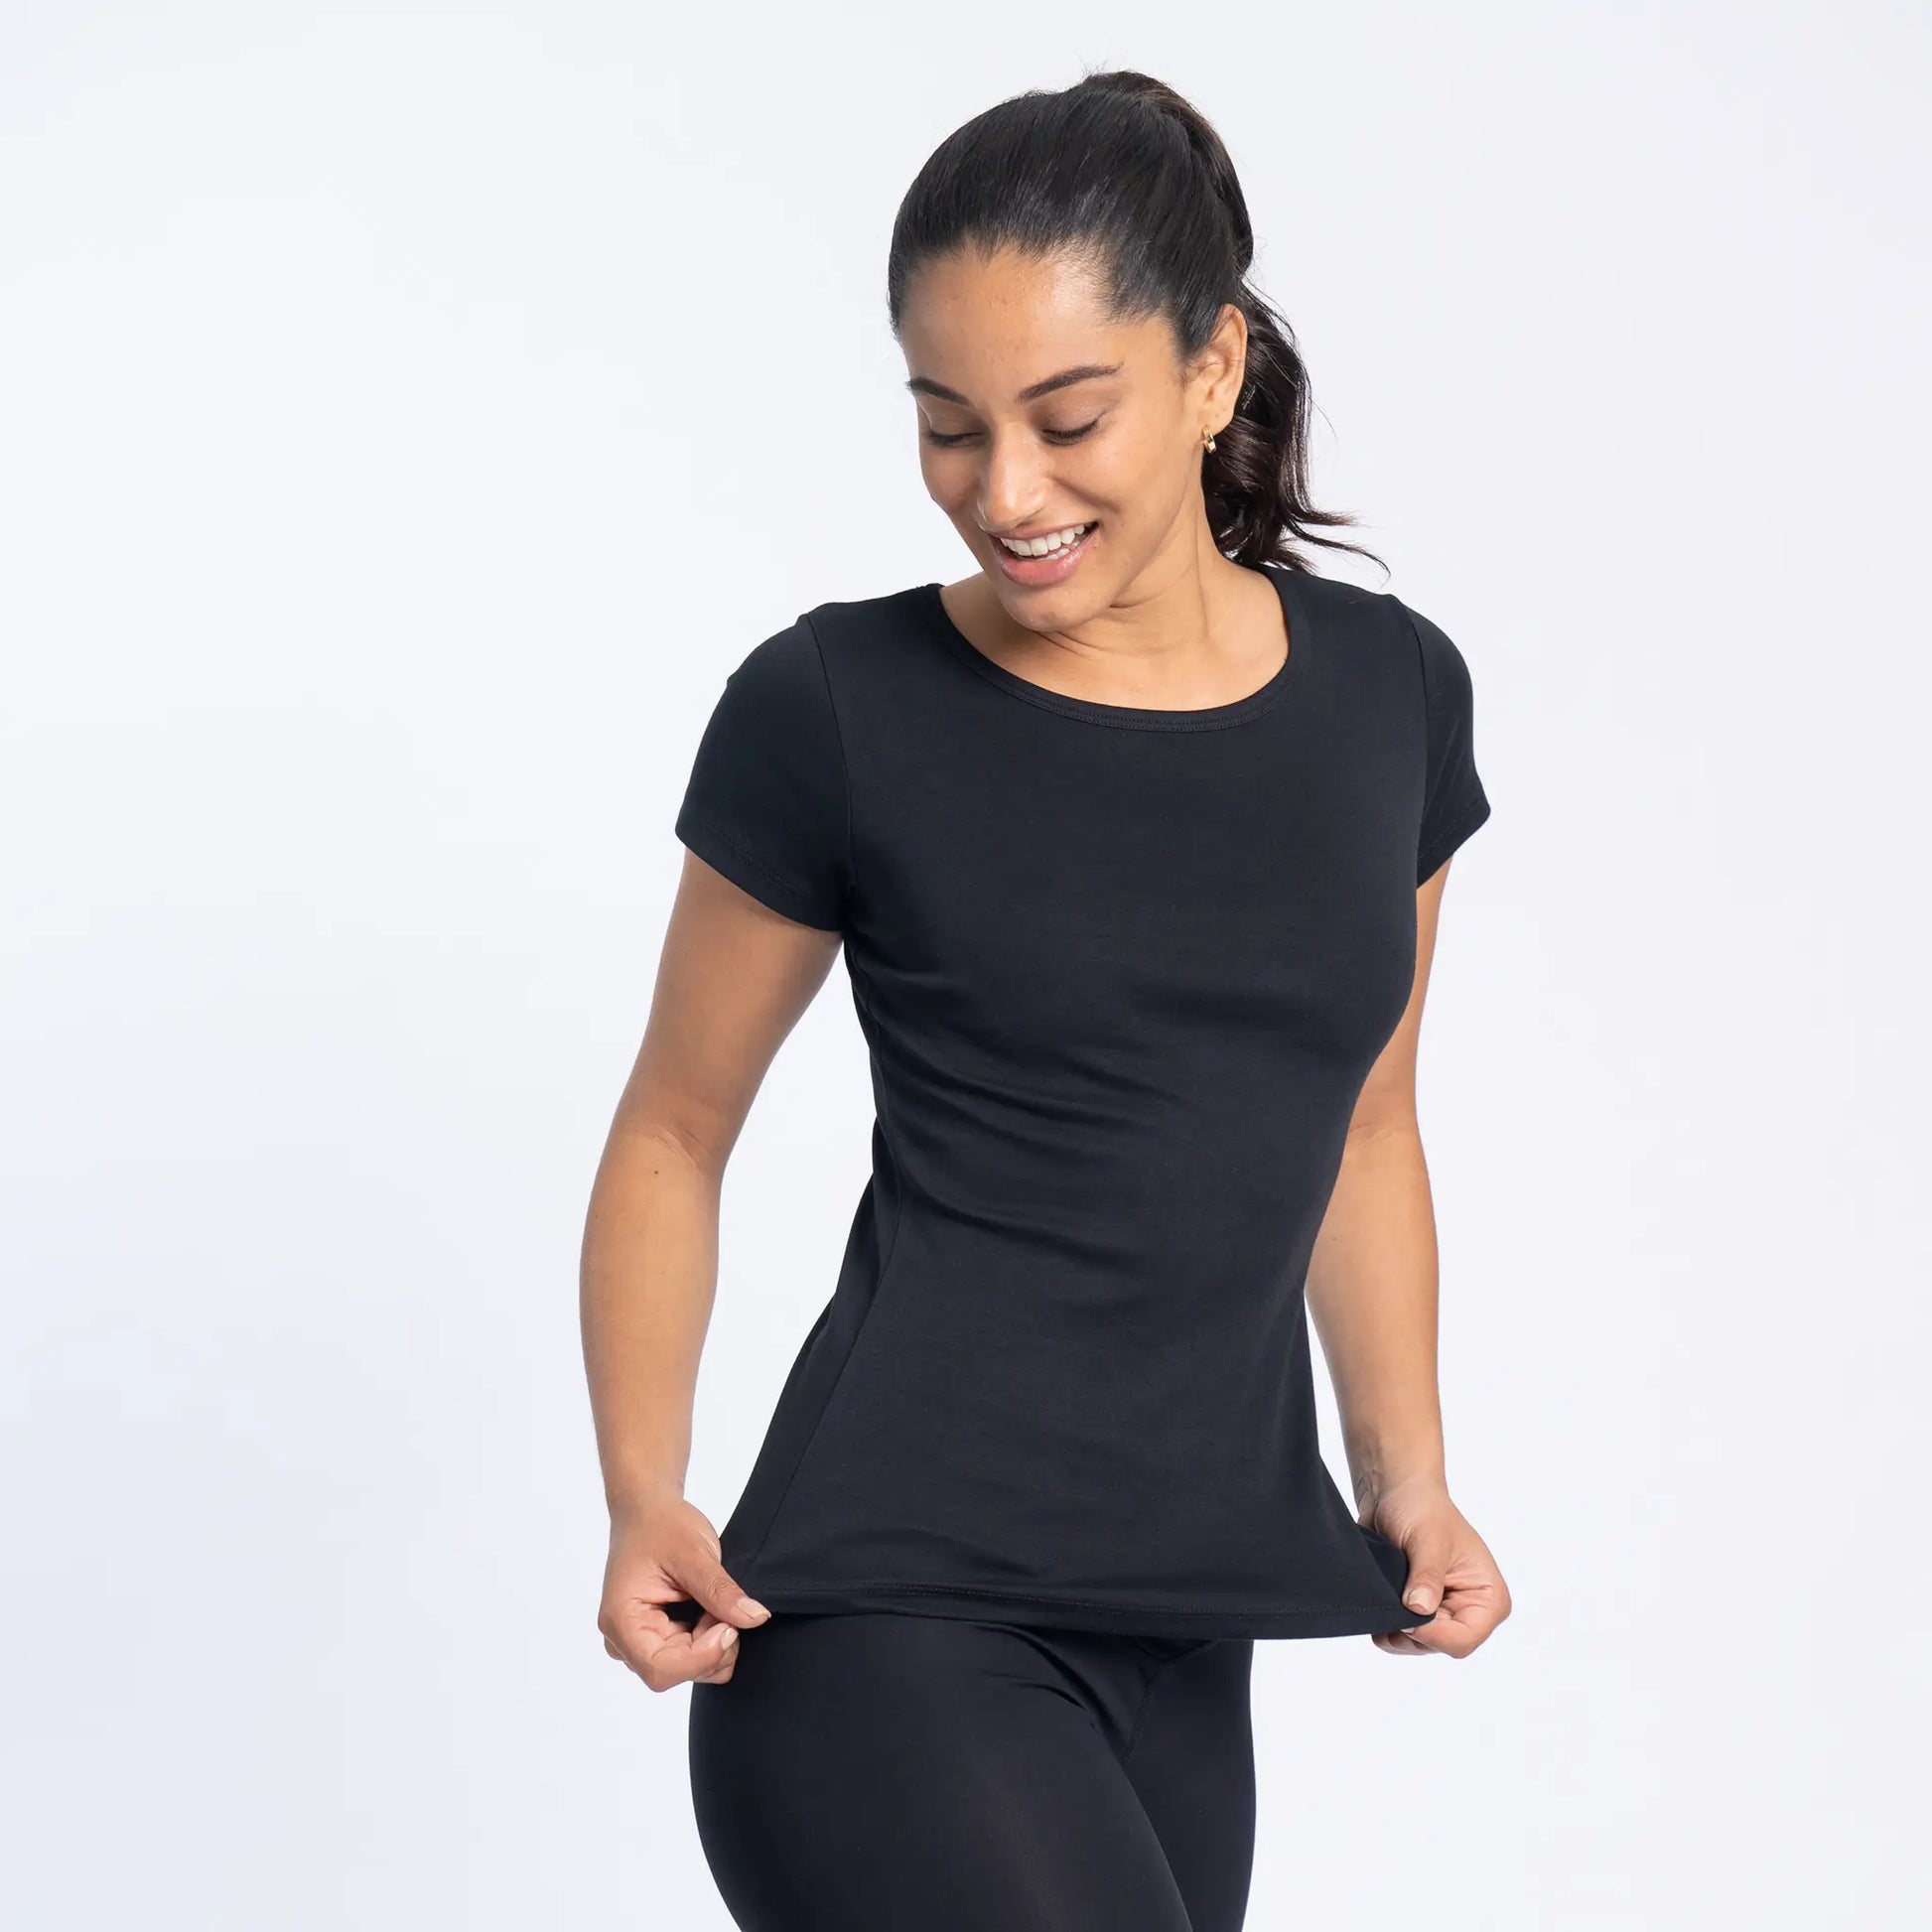 Women's Lounging Pack: 2x T-Shirts & Arms of Andes Sweatpants cover